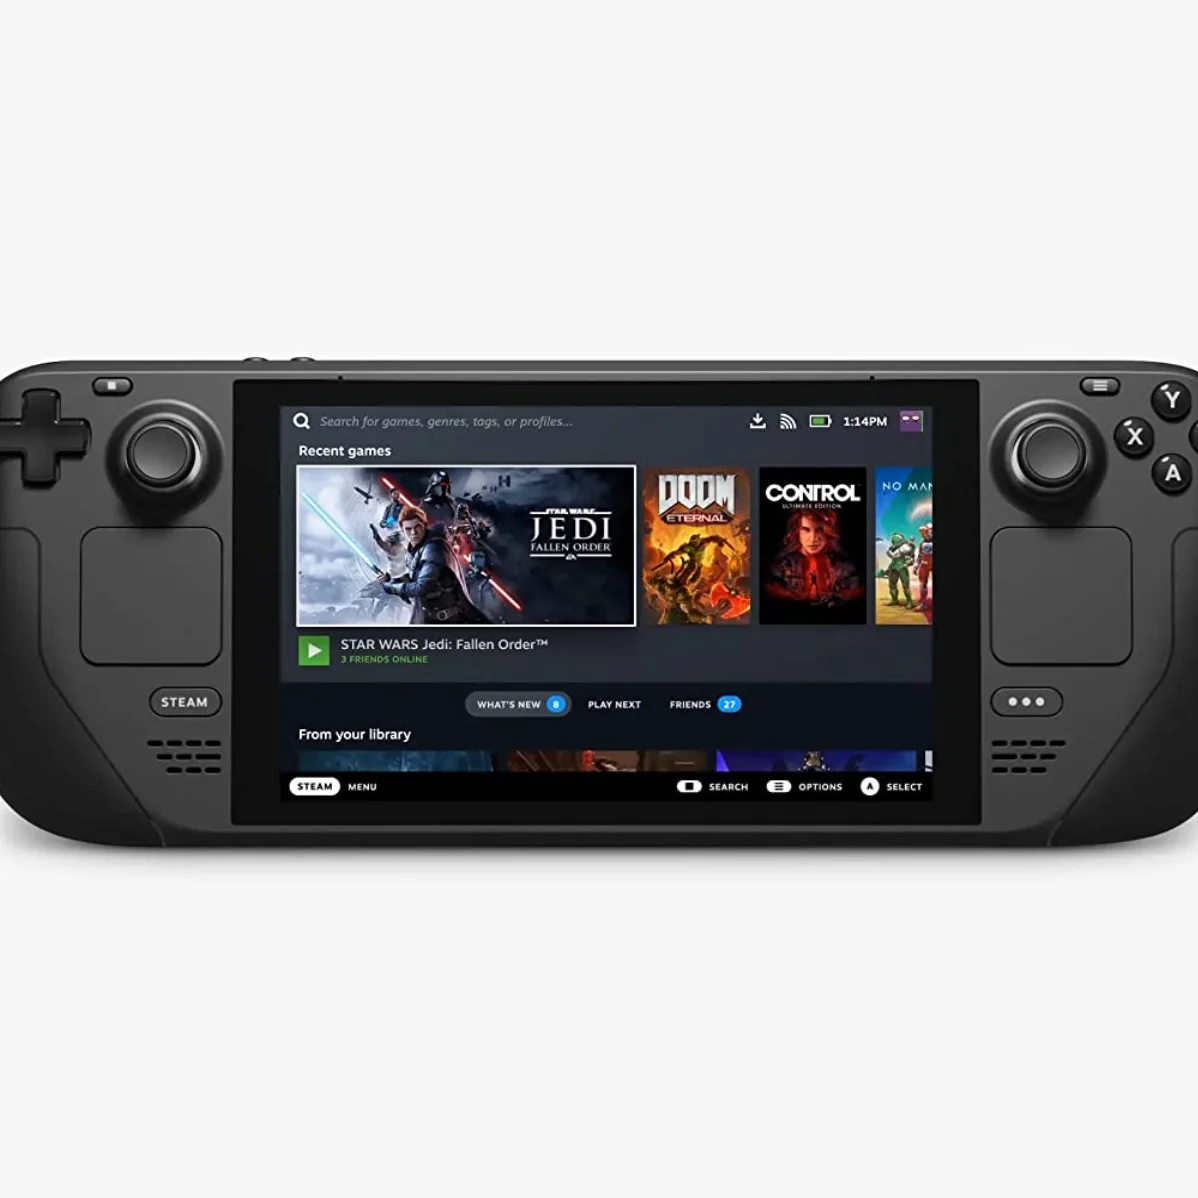 Steam Deck 64GB Handheld Console,delivering more than enough performance,Control with comfort